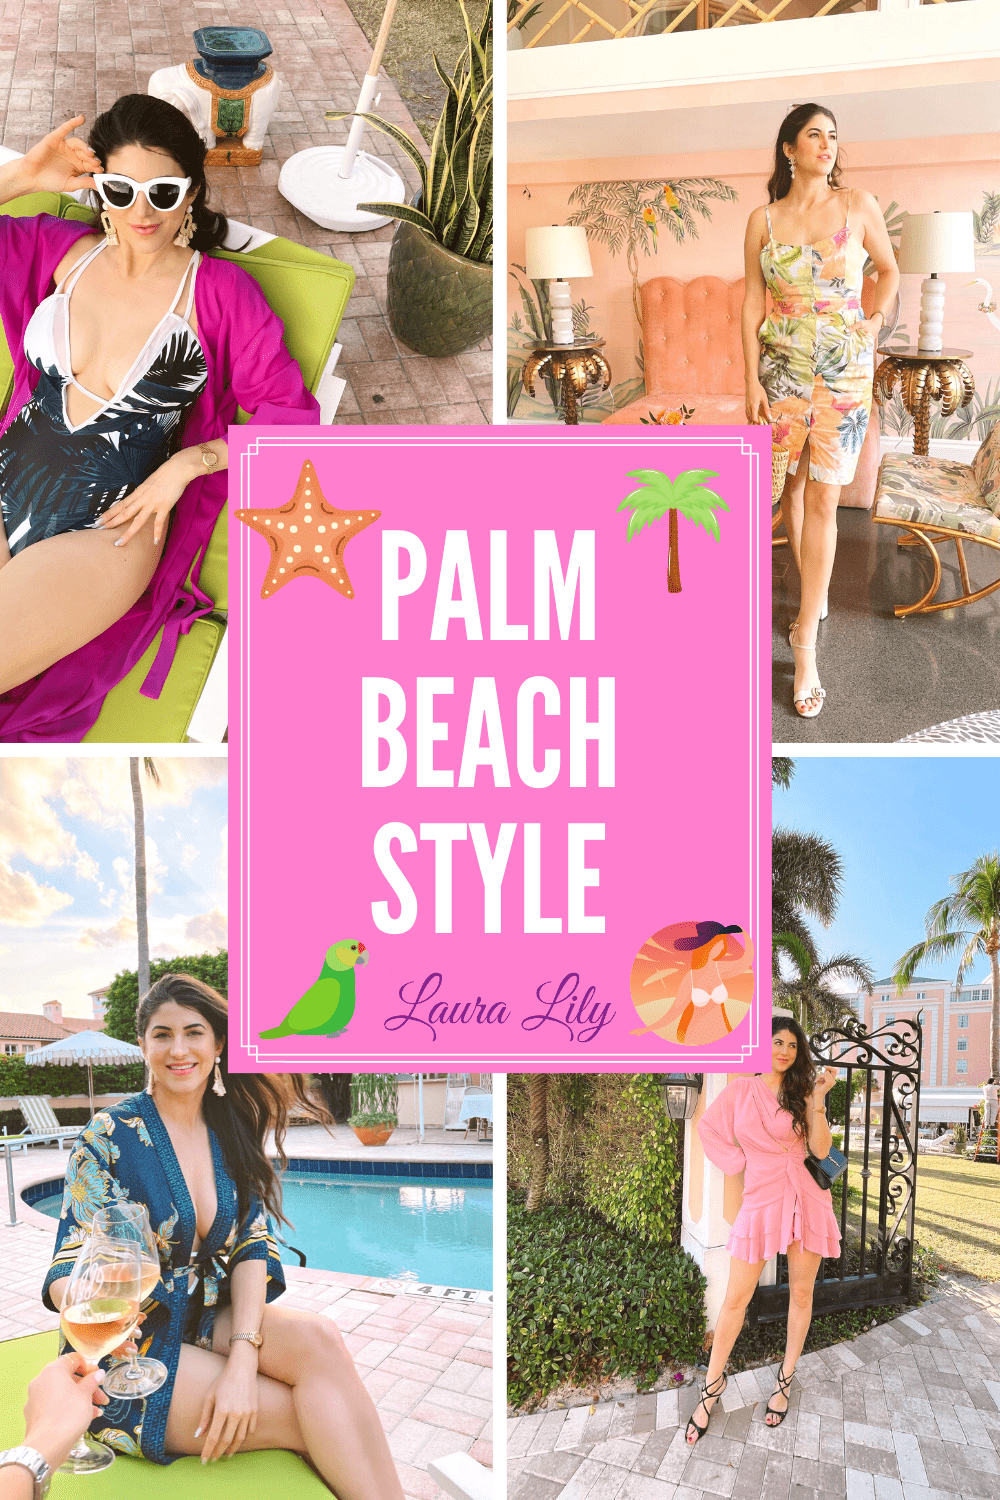 Palm Beach Travel Guide and Colony Palm Beach Hotel Review by Travel Blogger Laura Lily, The Best hotels in Palm Beach, Florida, What to Wear in Palm Beach, Palm Beach Style,